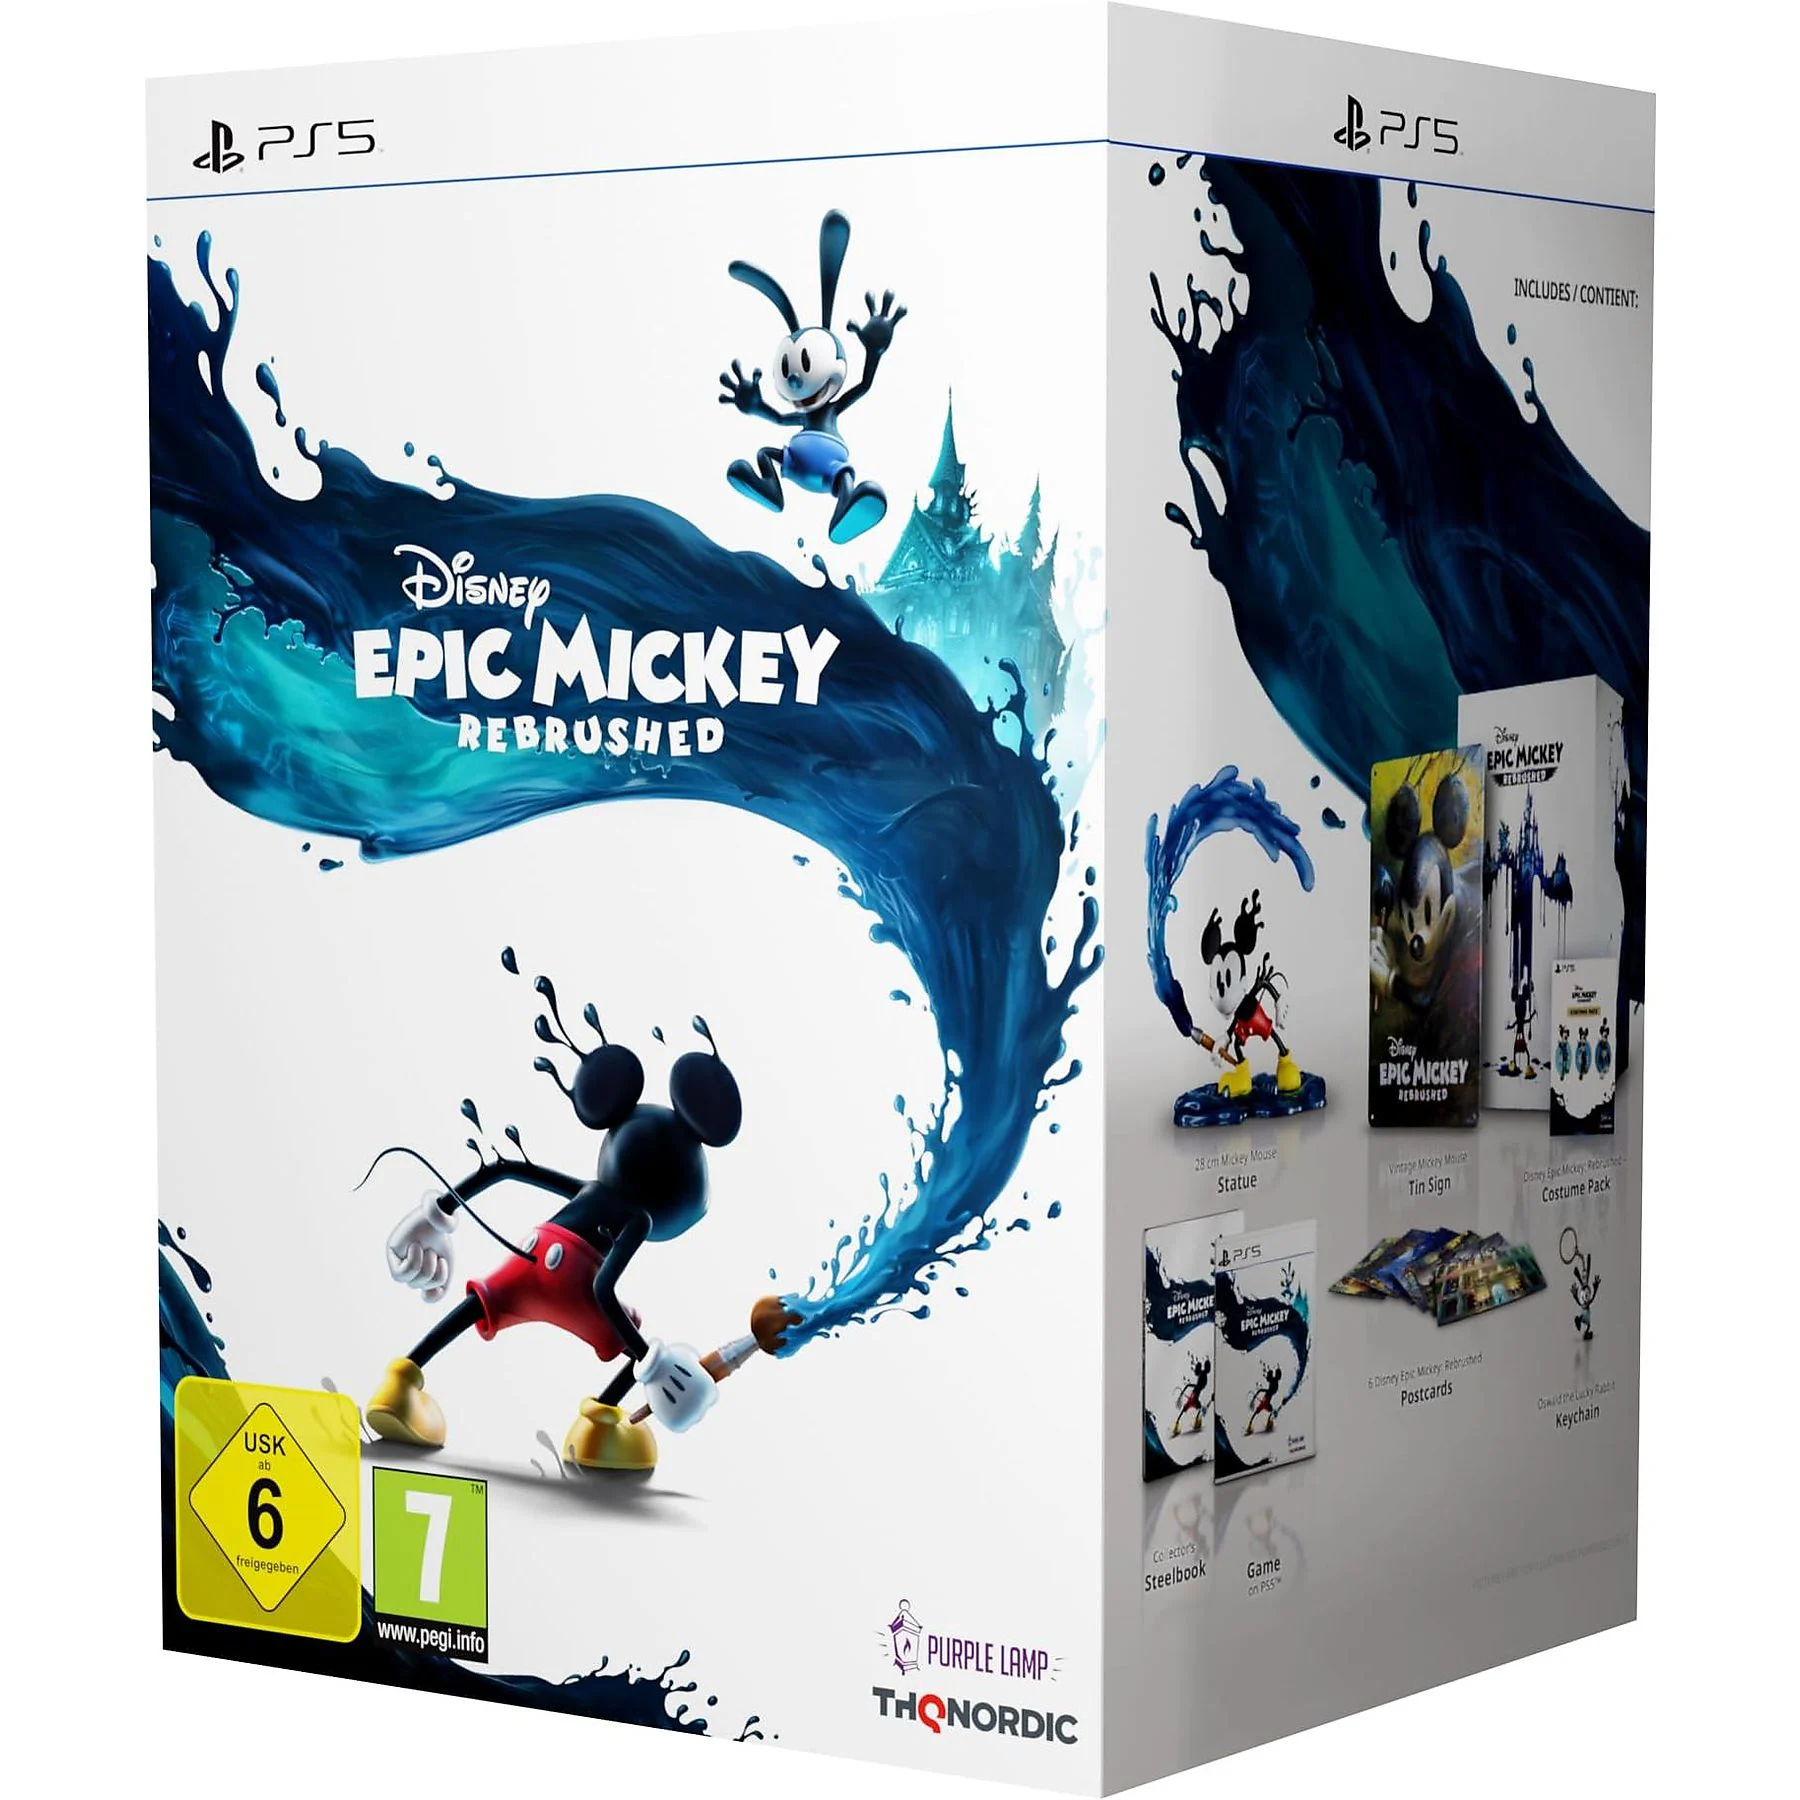 Disney Epic Mickey: Rebrushed - Collector's Edition - [PlayStation 5]